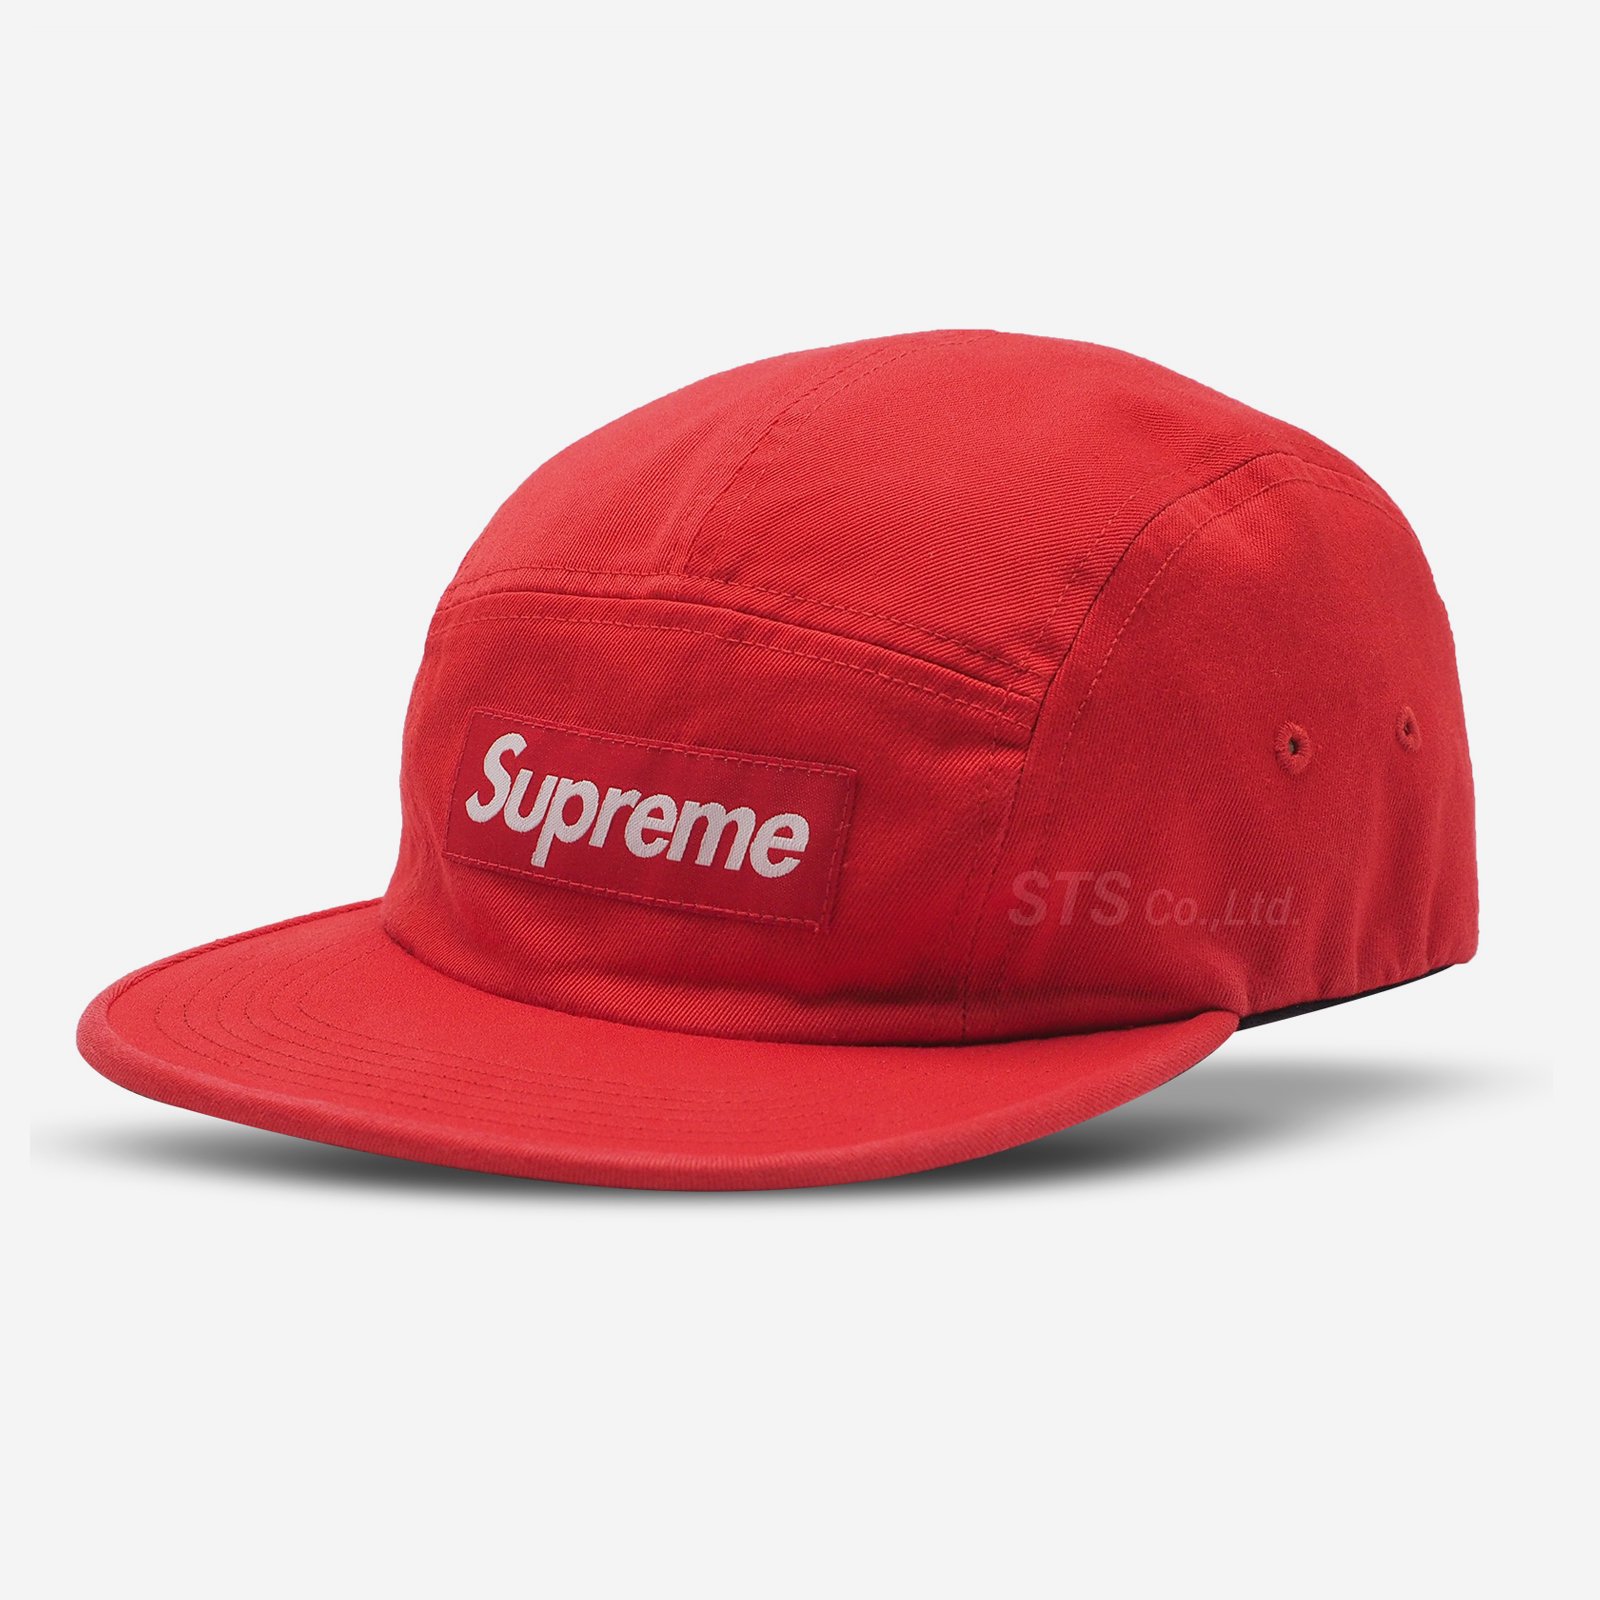 2019ss Washed Chino Twill Camp Cap